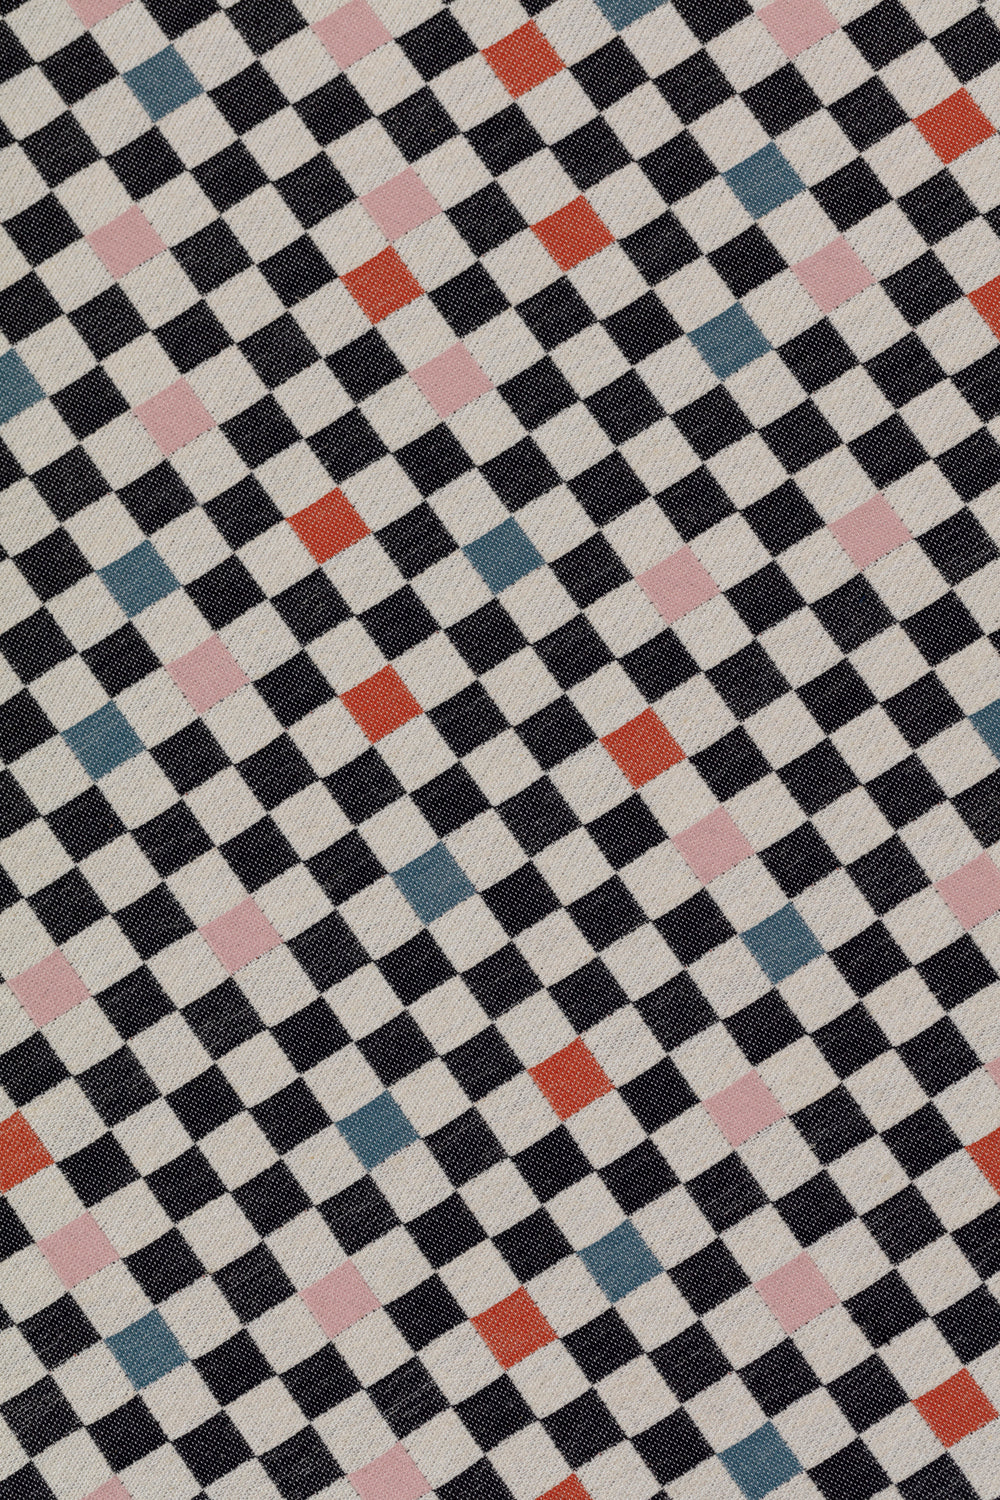 Detail of jacquard fabric in a checked pattern in shades of pink, red, blue and black on a tan field.